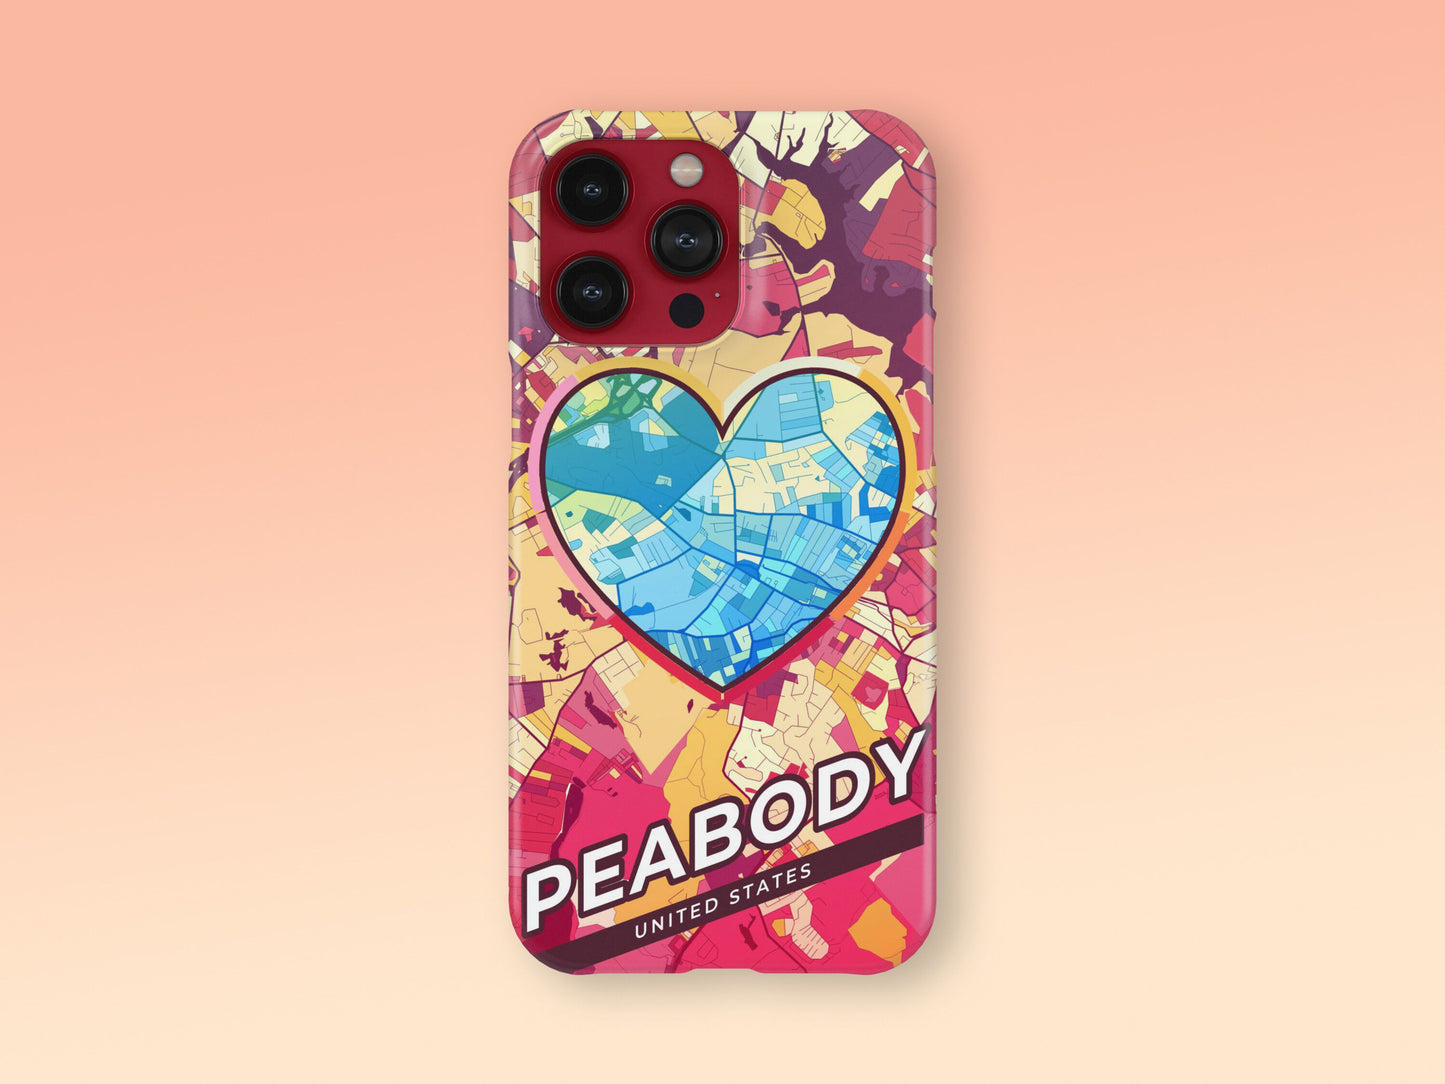 Peabody Massachusetts slim phone case with colorful icon 2